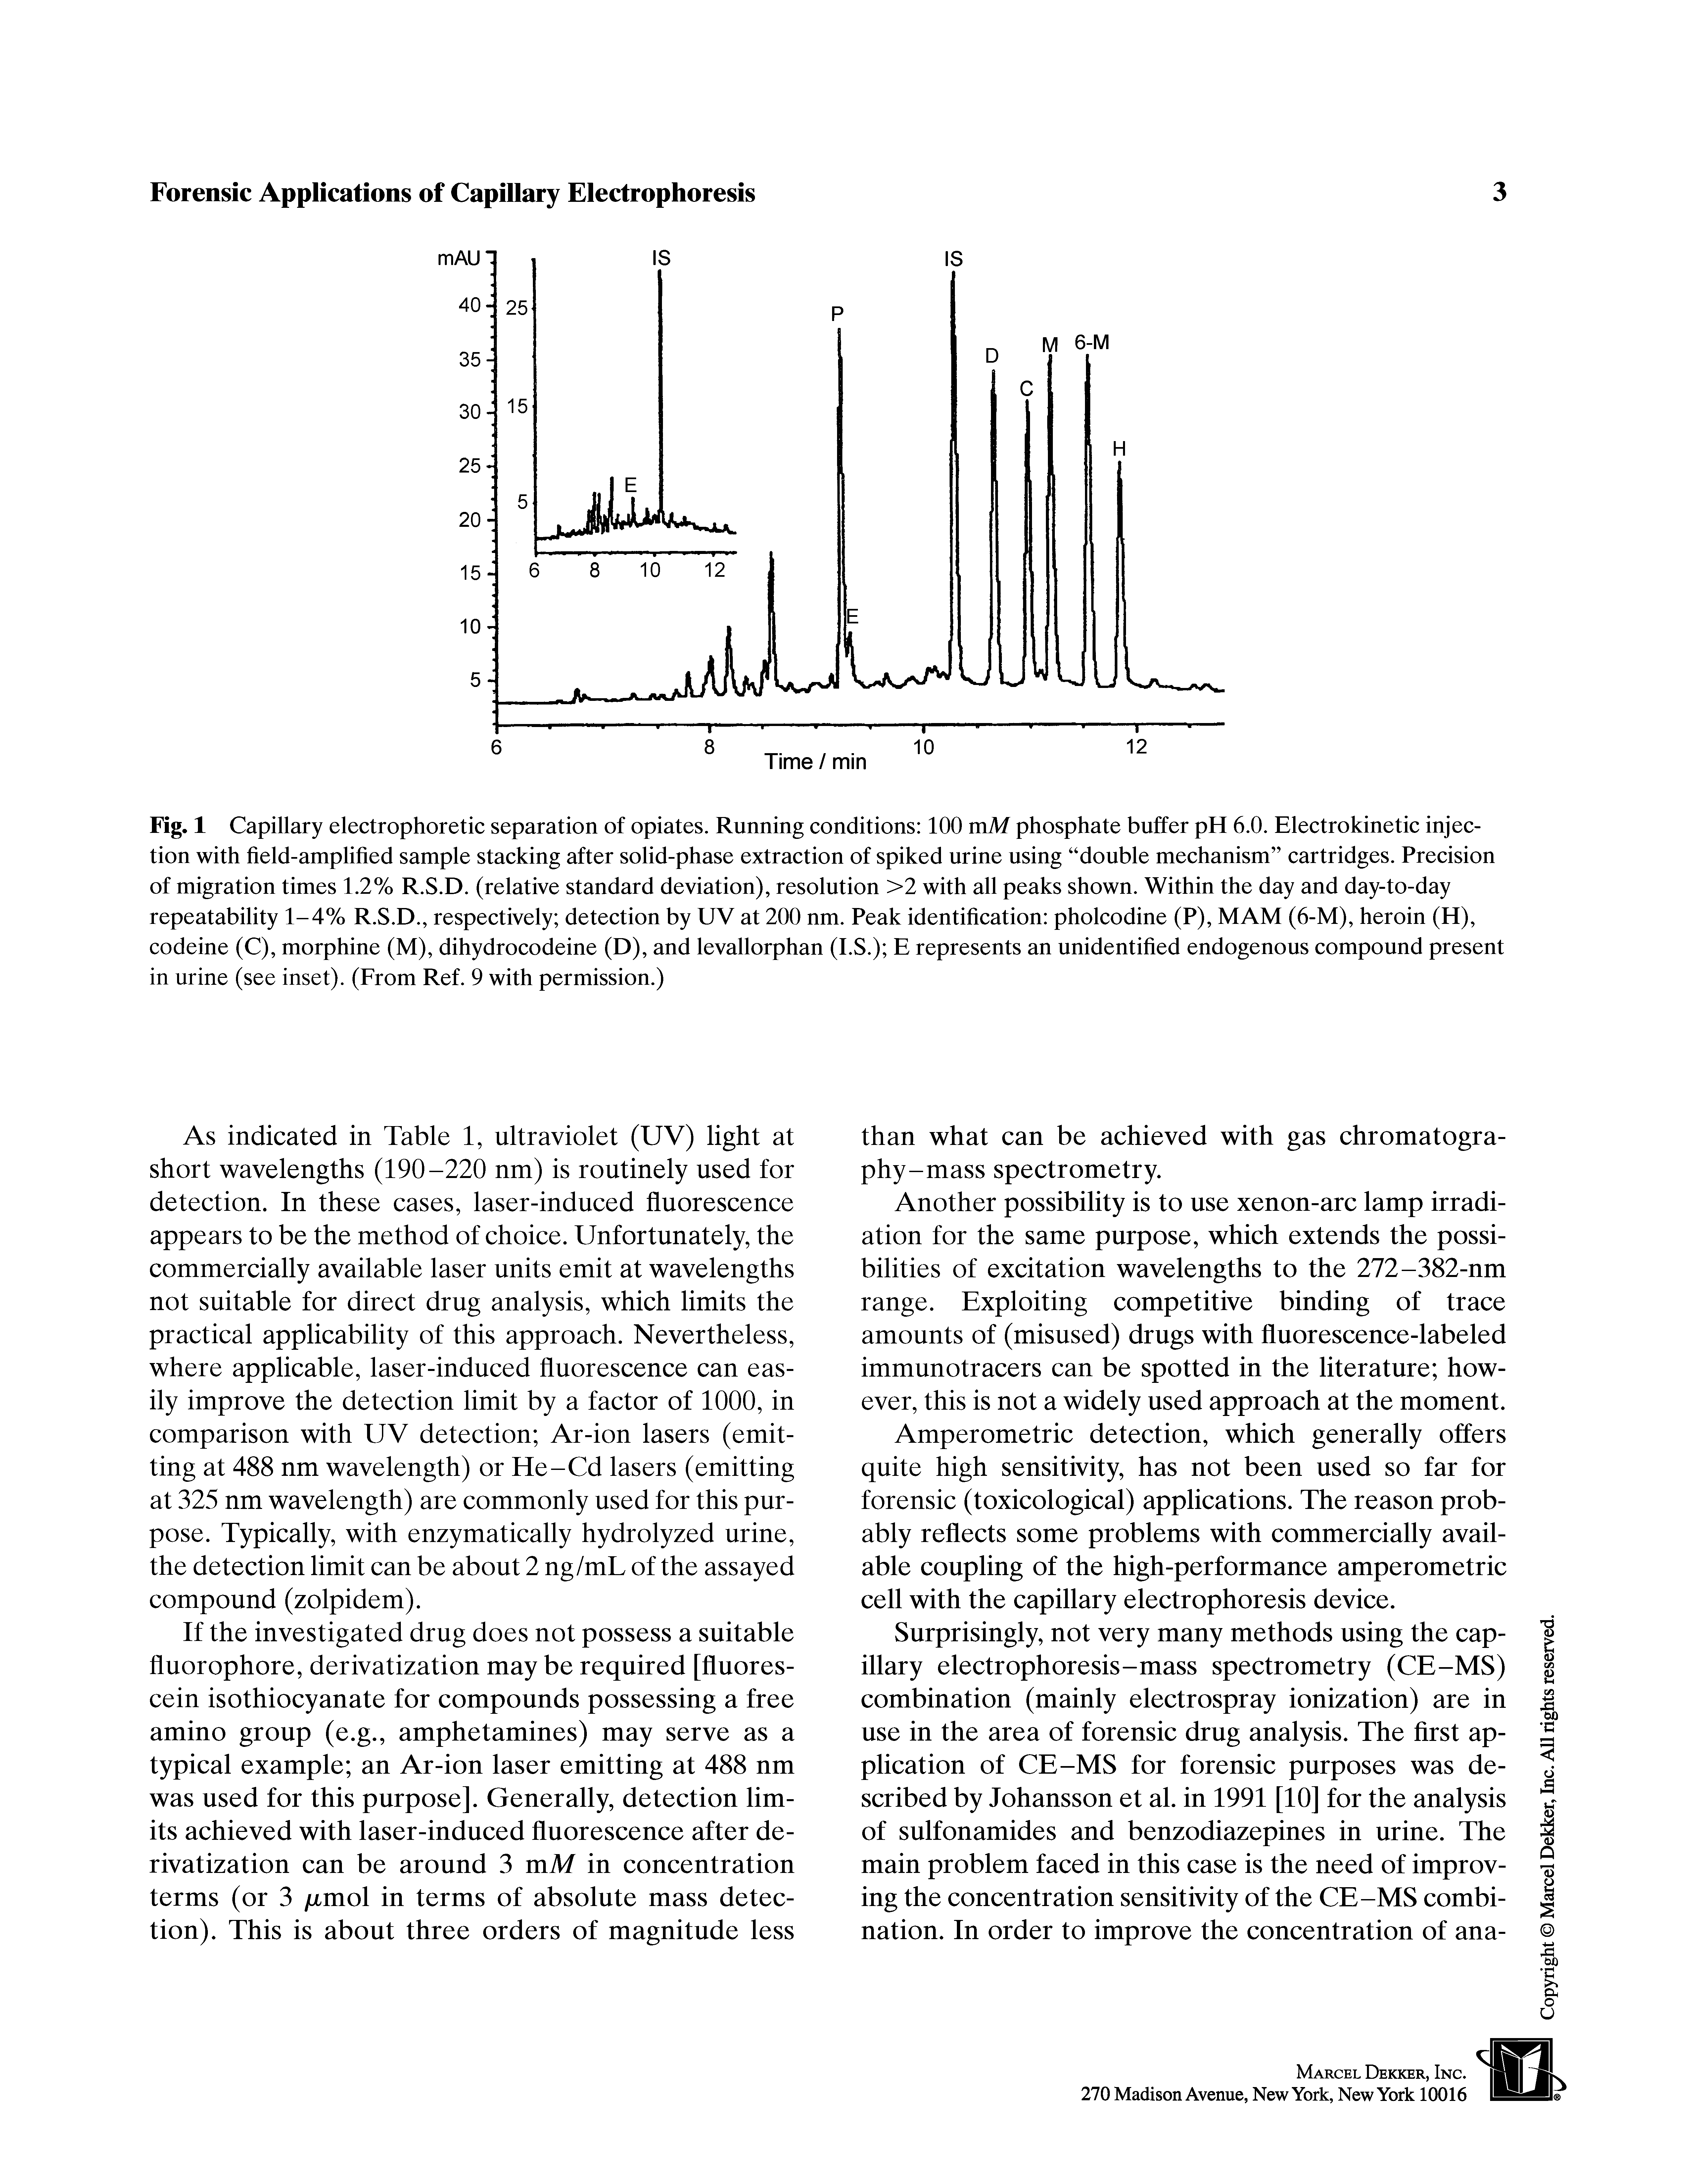 Fig. 1 Capillary electrophoretic separation of opiates. Running conditions 100 mM phosphate buffer pH 6.0. Electrokinetic injection with field-amplified sample stacking after solid-phase extraction of spiked urine using double mechanism cartridges. Precision of migration times 1.2% R.S.D. (relative standard deviation), resolution >2 with all peaks shown. Within the day and day-to-day repeatability 1-4% R.S.D., respectively detection by UV at 200 nm. Peak identification pholcodine (P), MAM (6-M), heroin (H), codeine (C), morphine (M), dihydrocodeine (D), and levallorphan (I.S.) E represents an unidentified endogenous compound present in urine (see inset). (From Ref. 9 with permission.)...